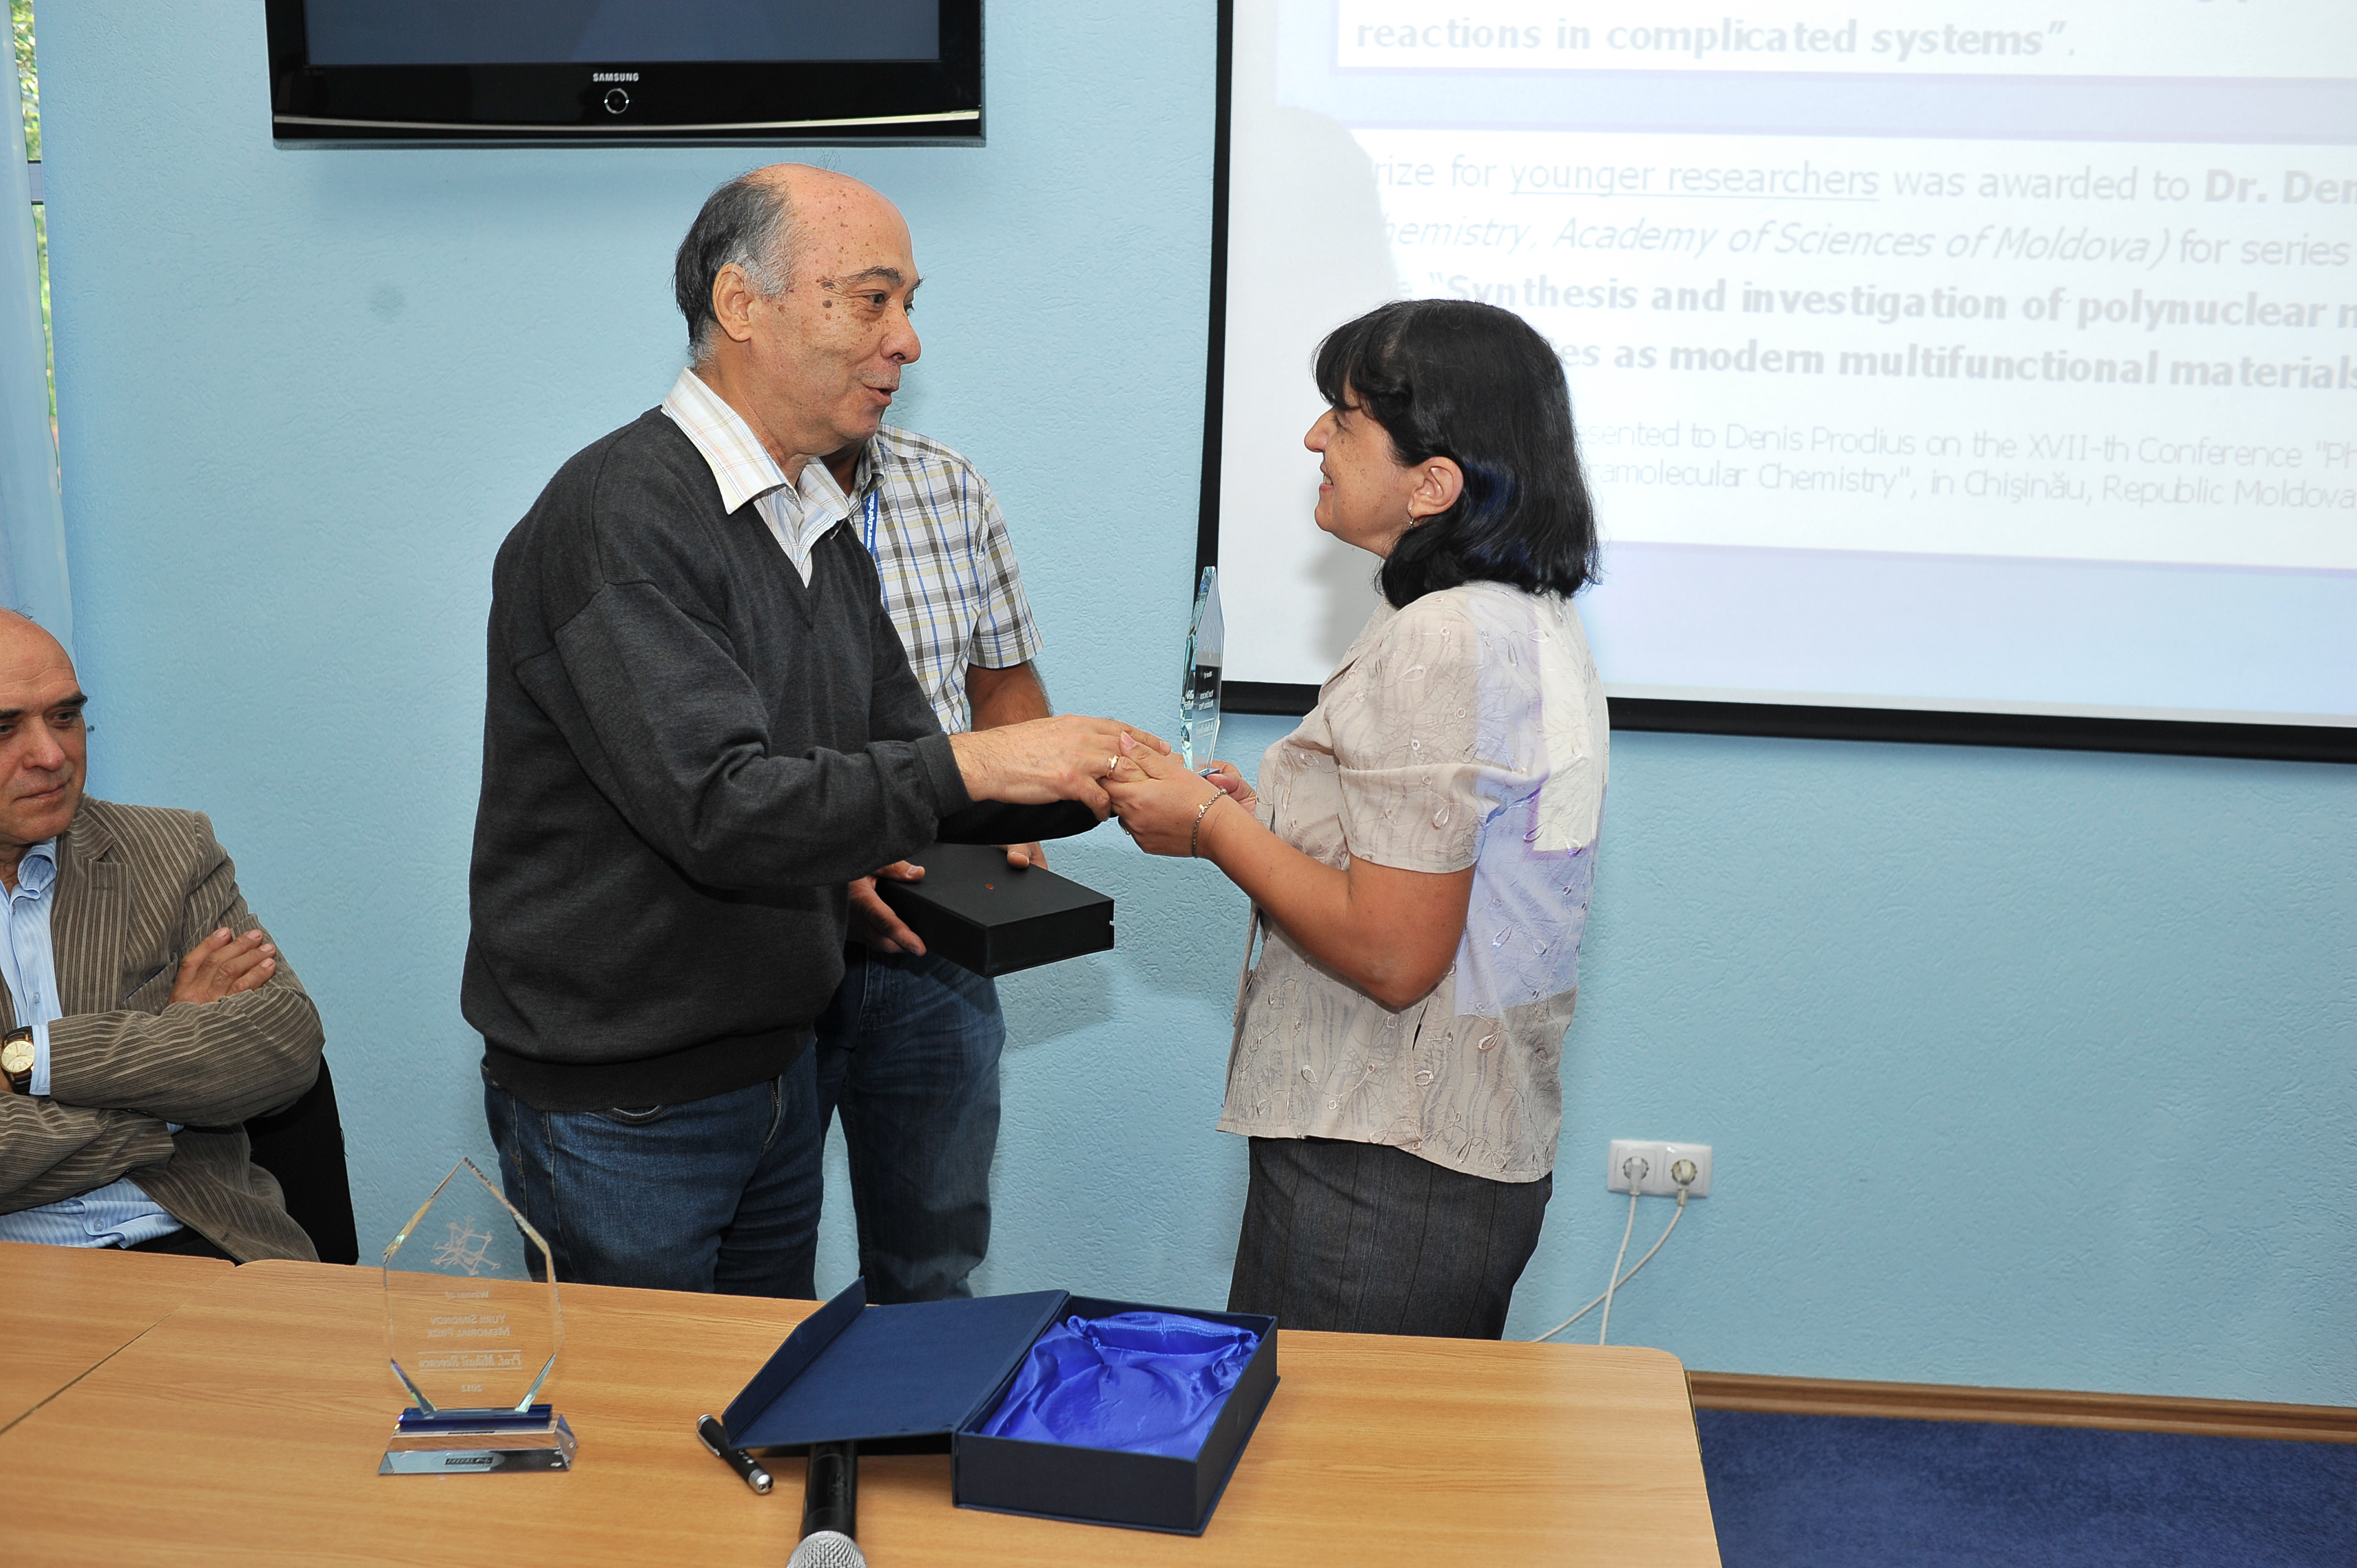 Dr Bourosh receives the 2012 prize